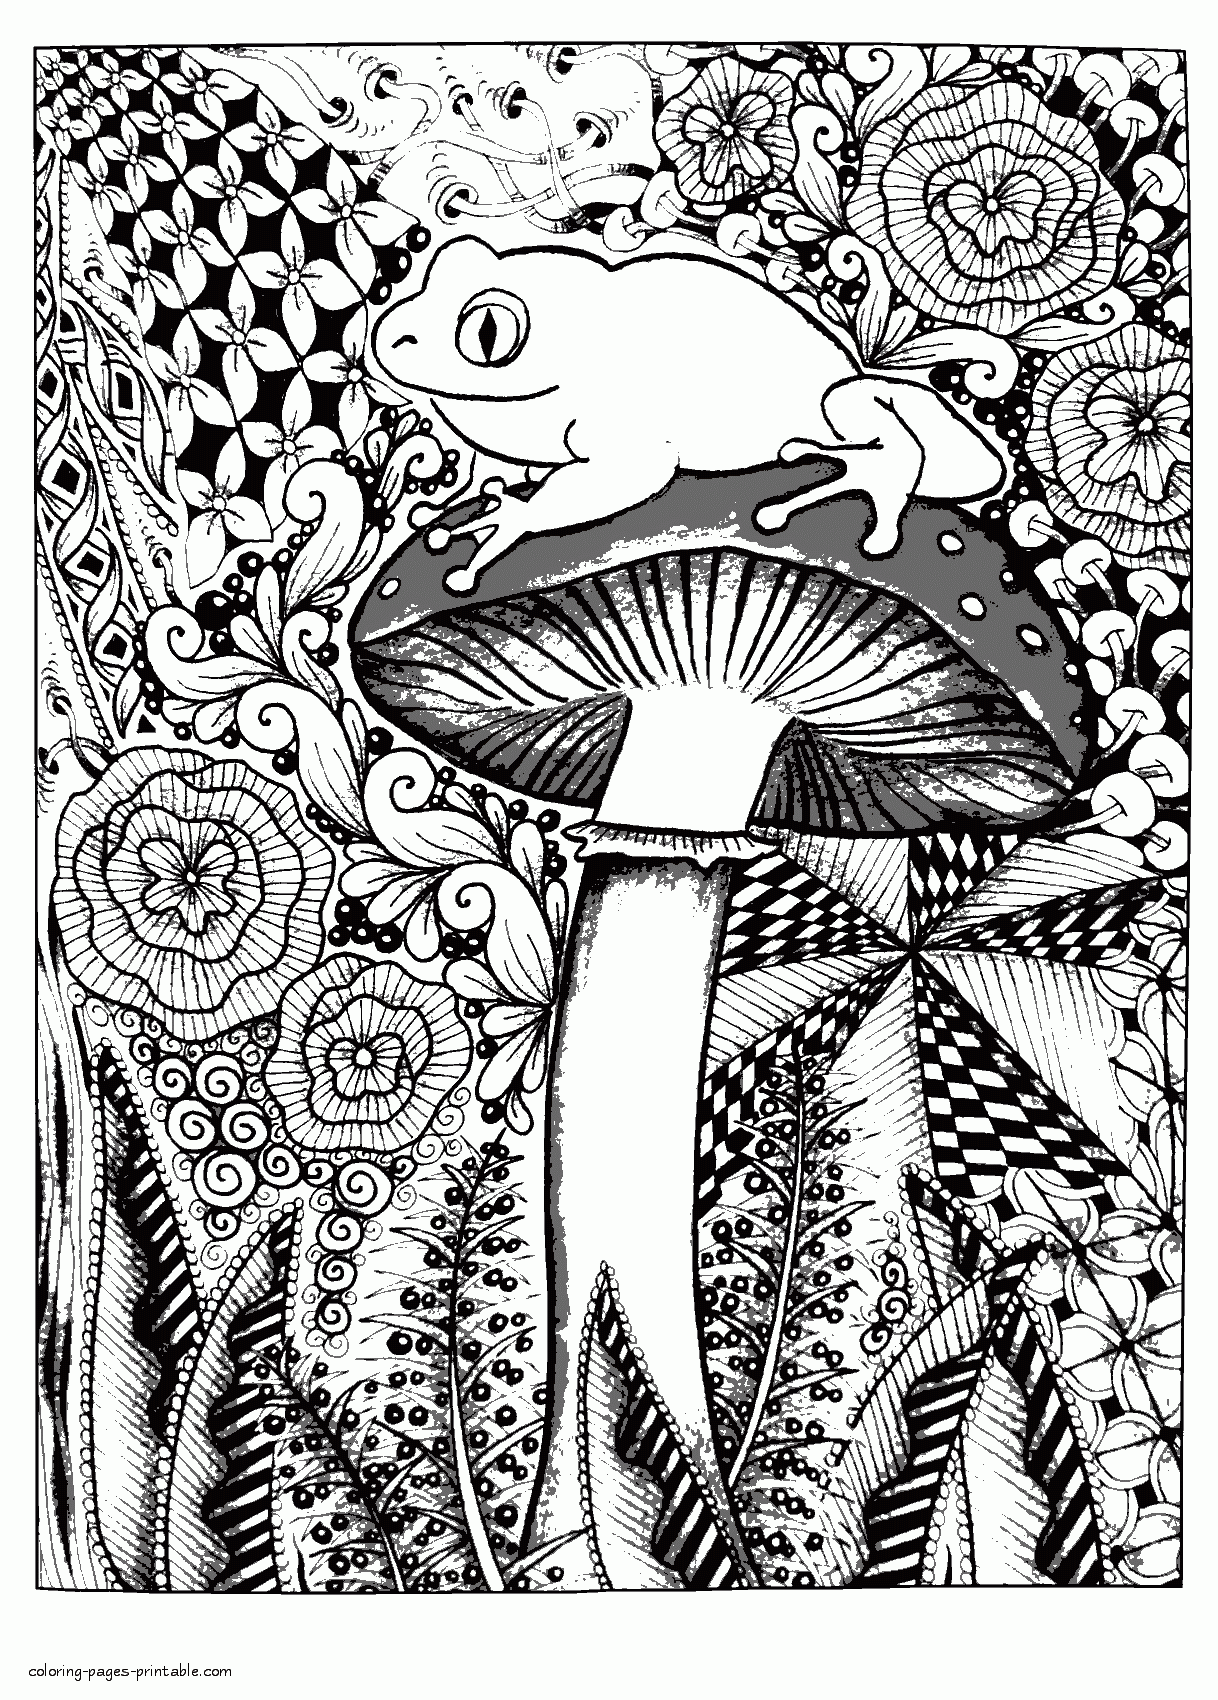 Animal Design Coloring Pages For Adults. Frog    COLORING PAGES ...